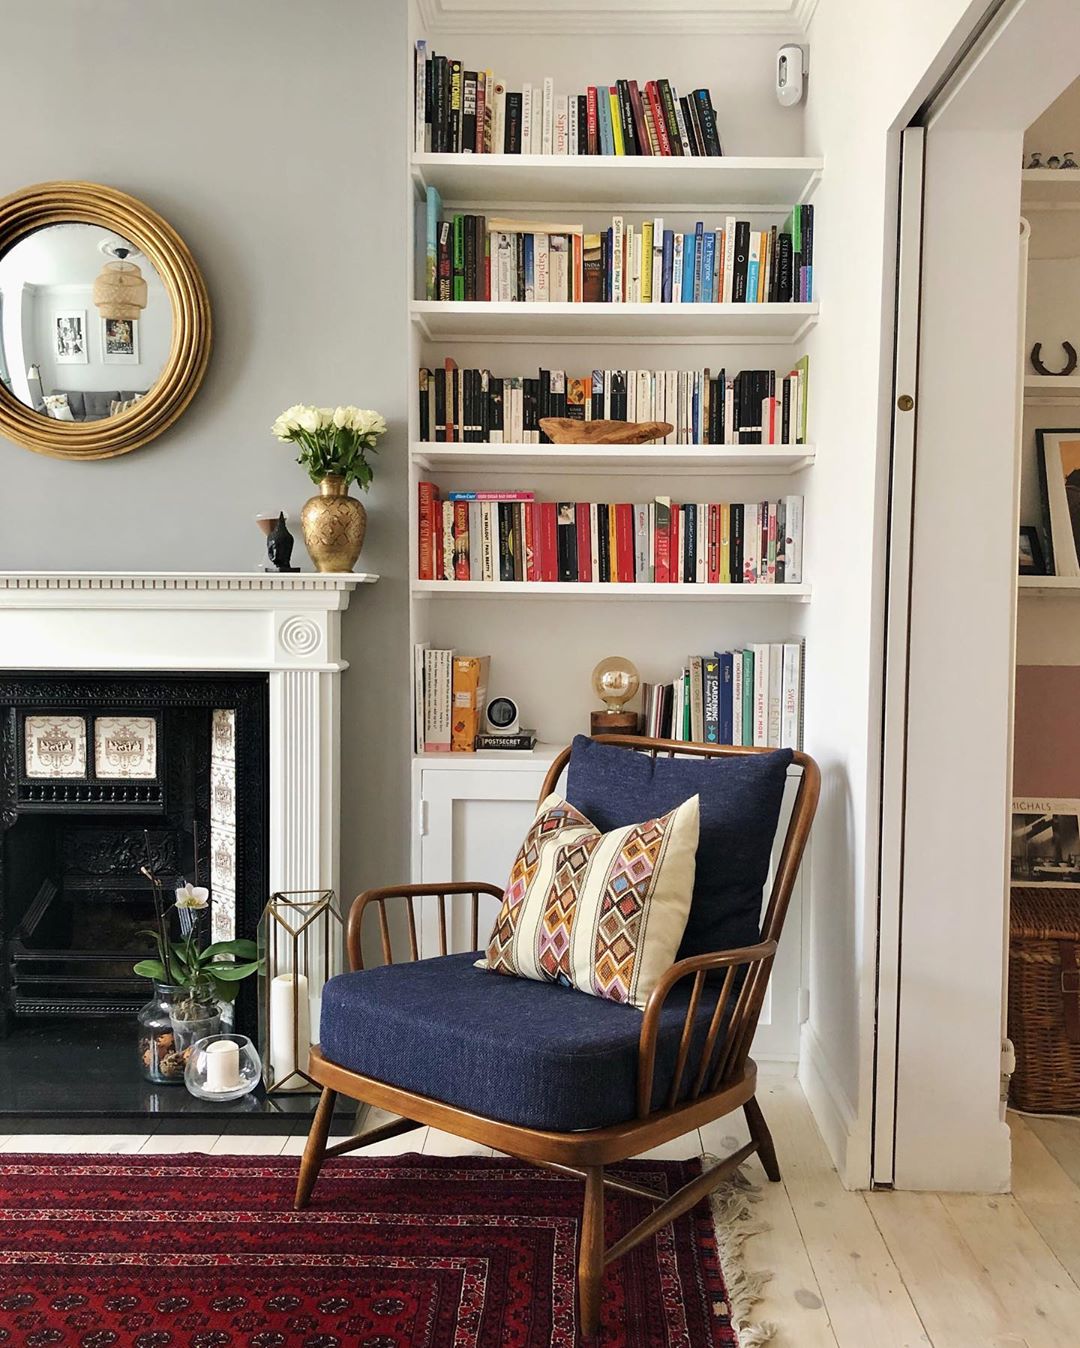 Small Reading Area in a Living Room with Comfy Chair and Bookshelves. Photo by Instagram user @pero_homes